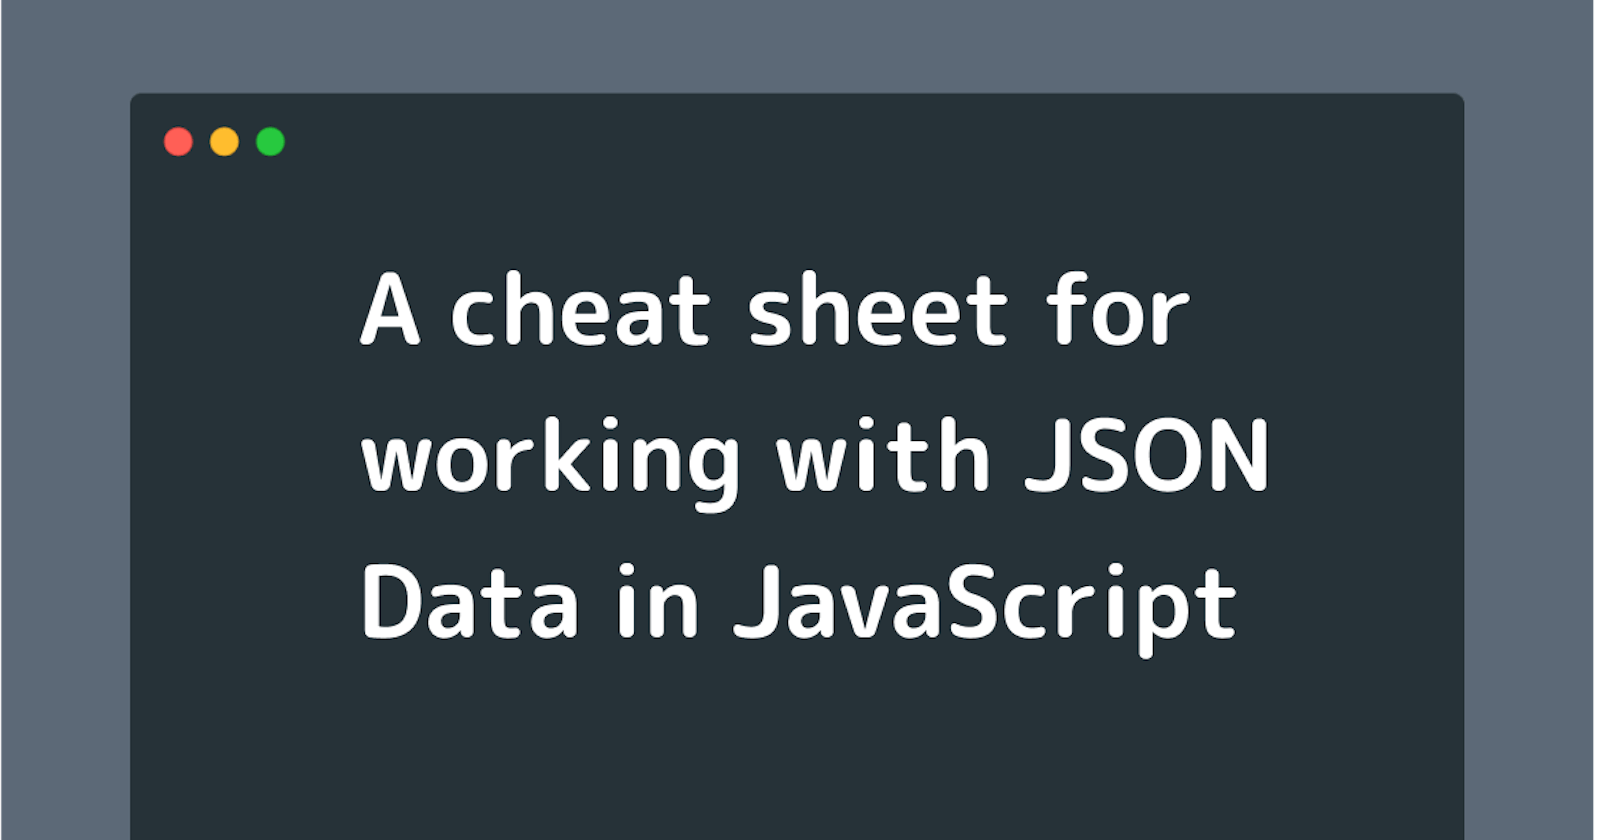 A cheat sheet for working with JSON Data in JavaScript